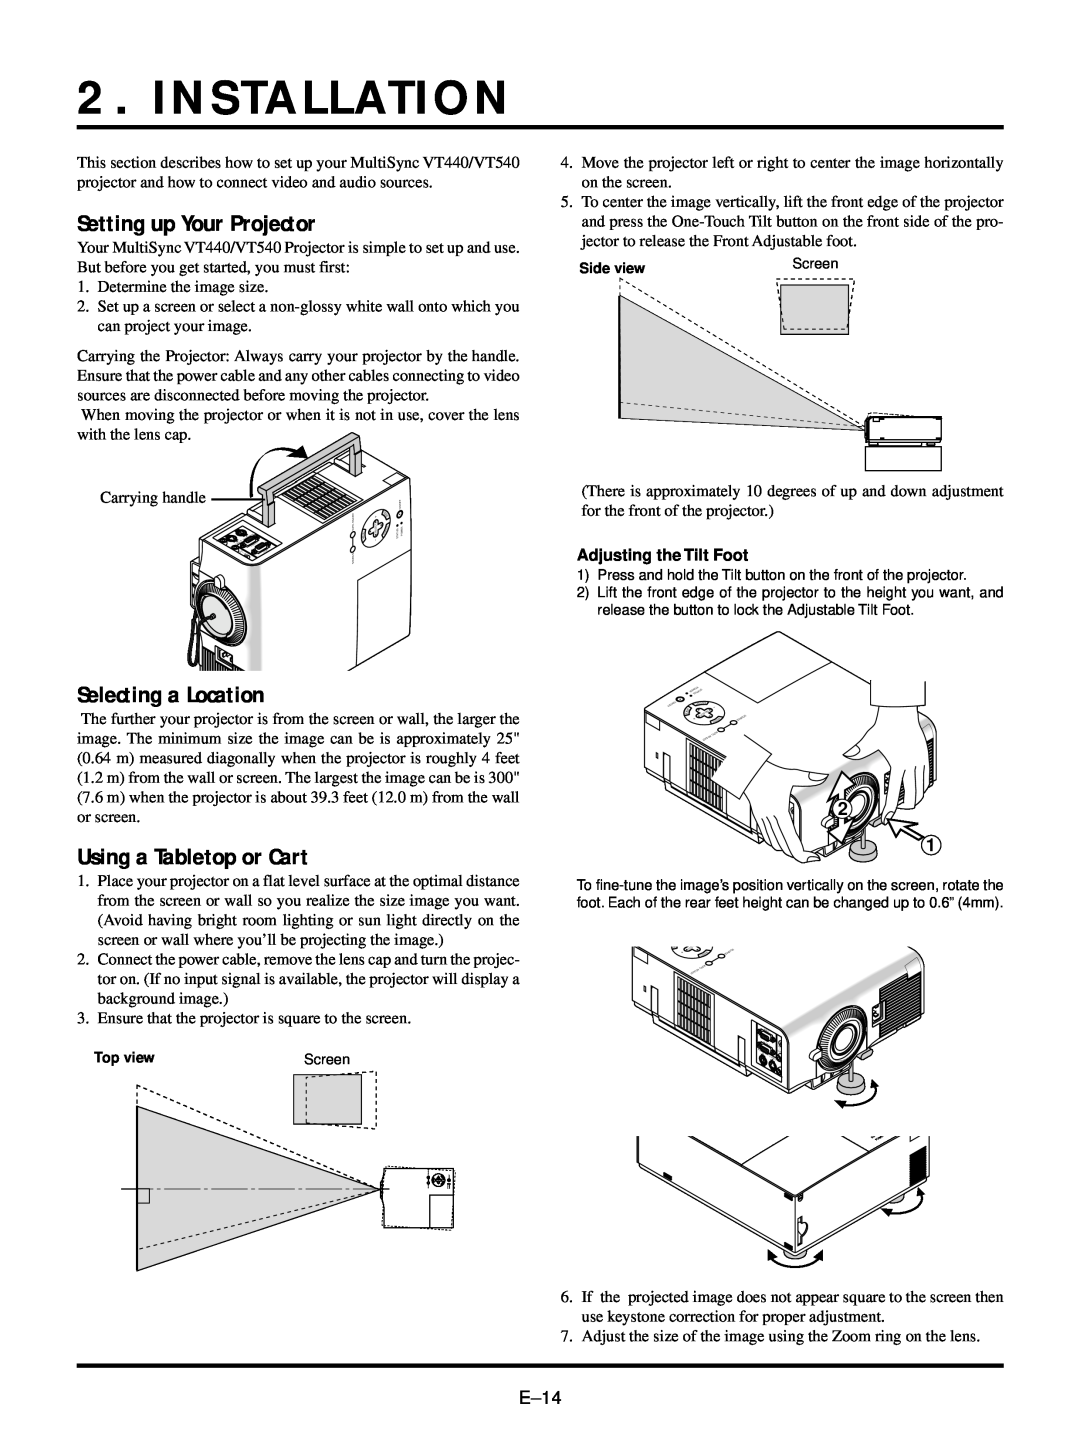 NEC VT440, VT540 user manual Installation, Setting up Your Projector, Selecting a Location, Using a Tabletop or Cart 